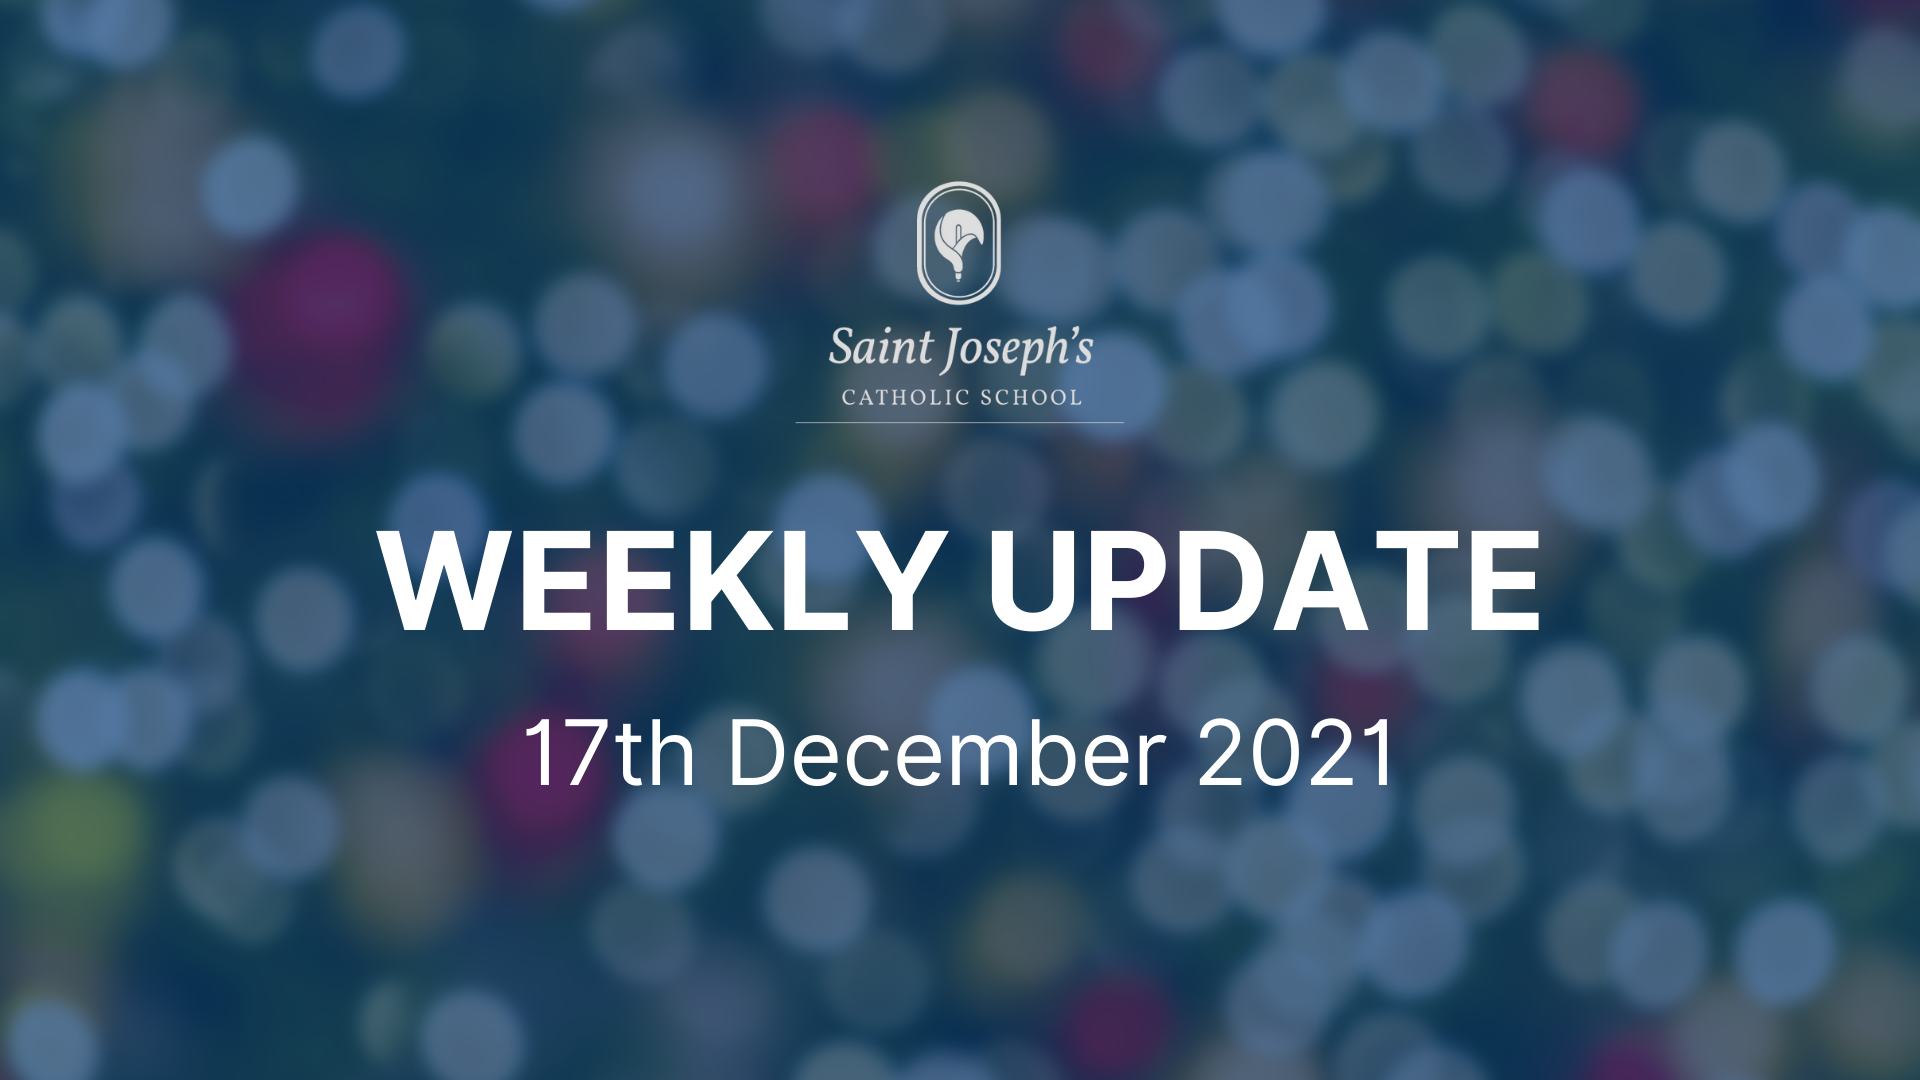 Featured image for “Weekly Update: 17th December 2021”